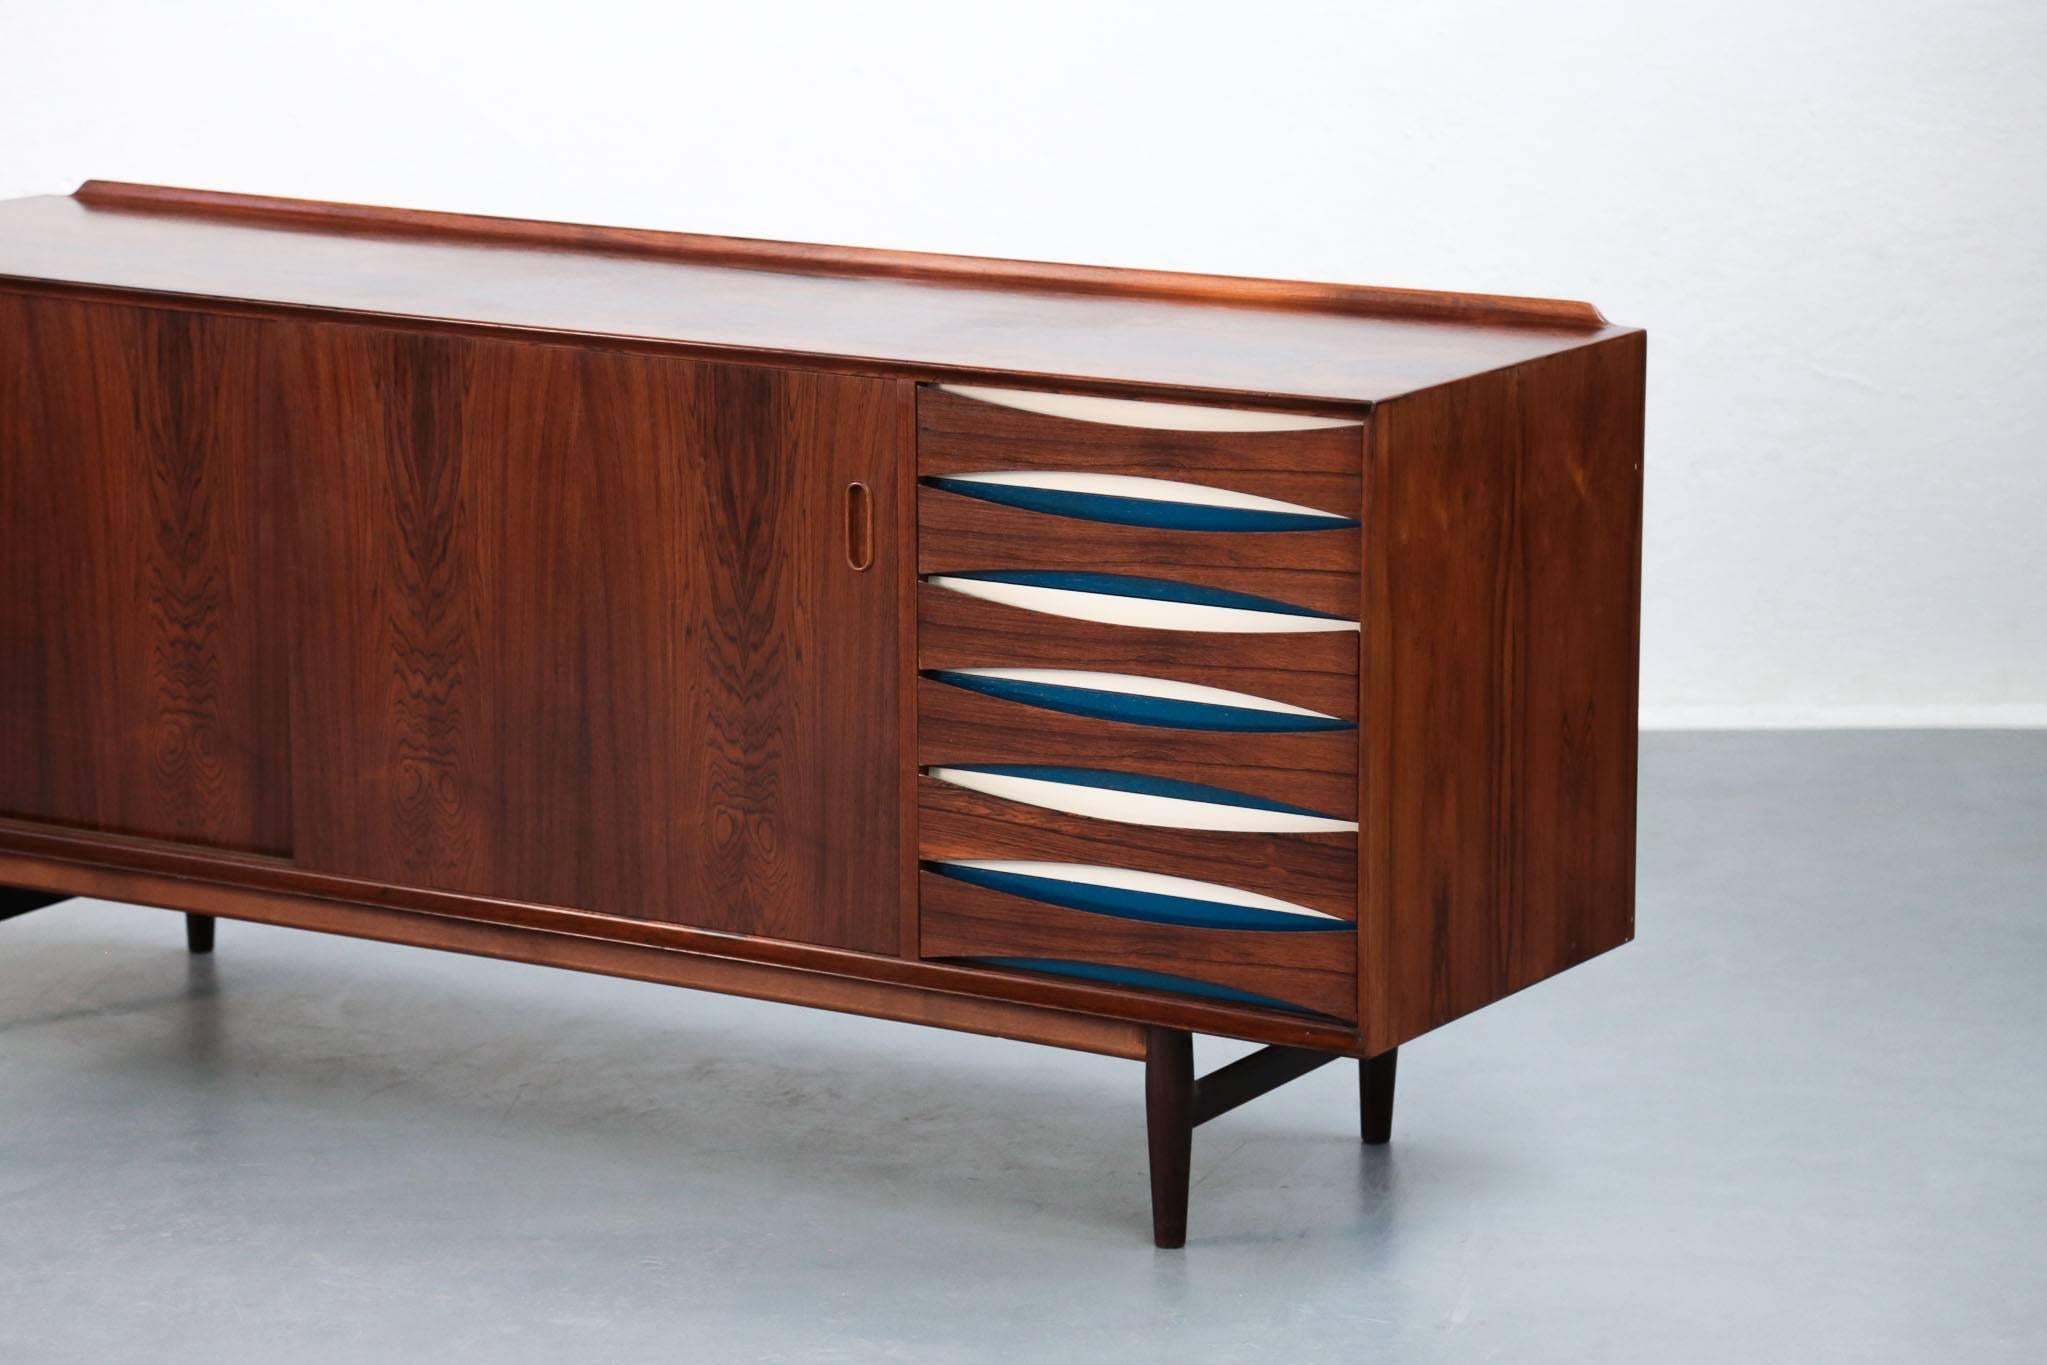 Mid-20th Century Rare Danish Sideboard by Arne Vodder, Rio Rosewood, 1958